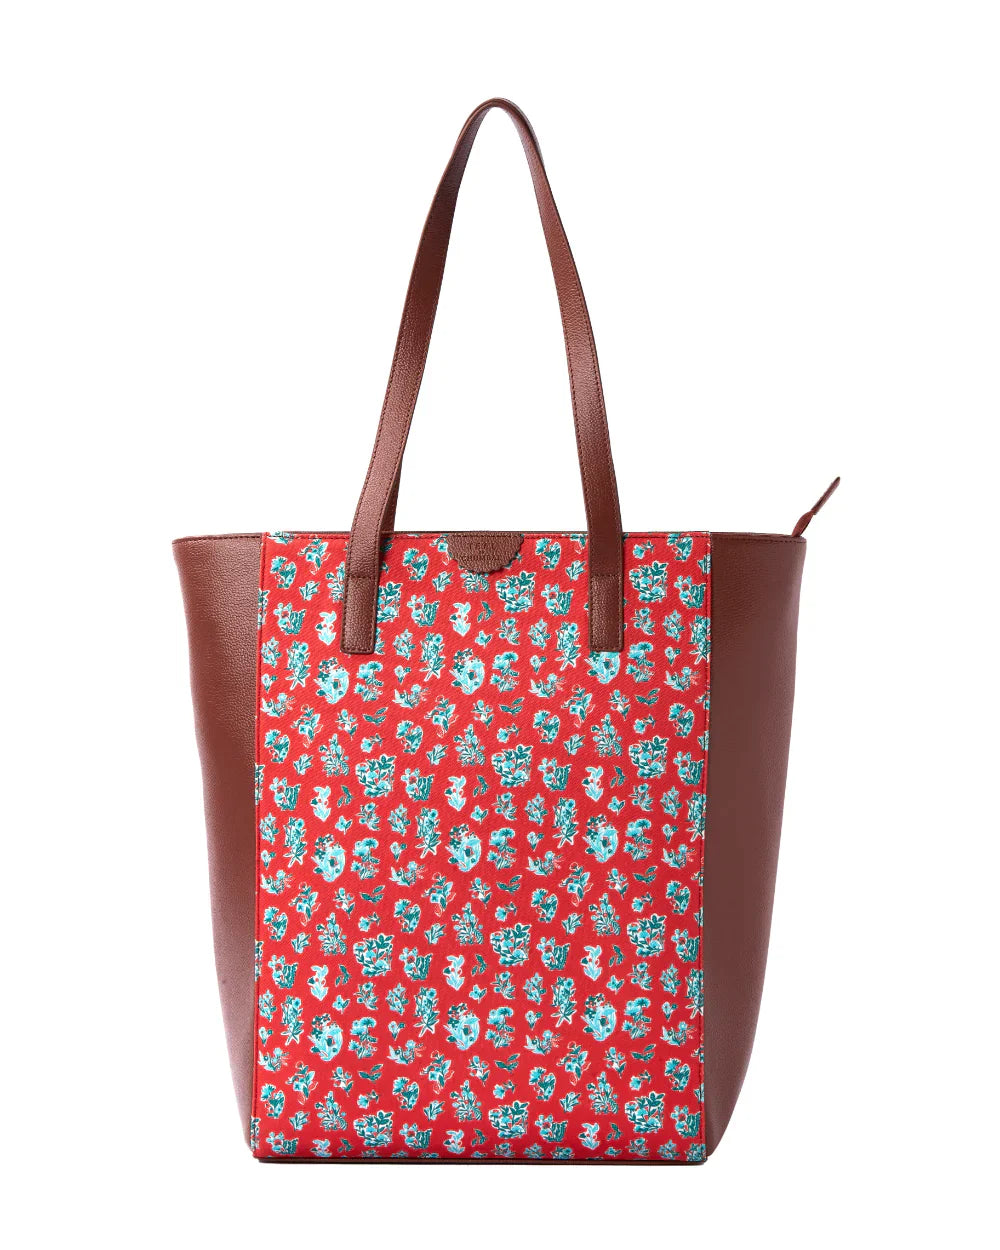 Teal By Wildflower Shopper Tote - Chumbak